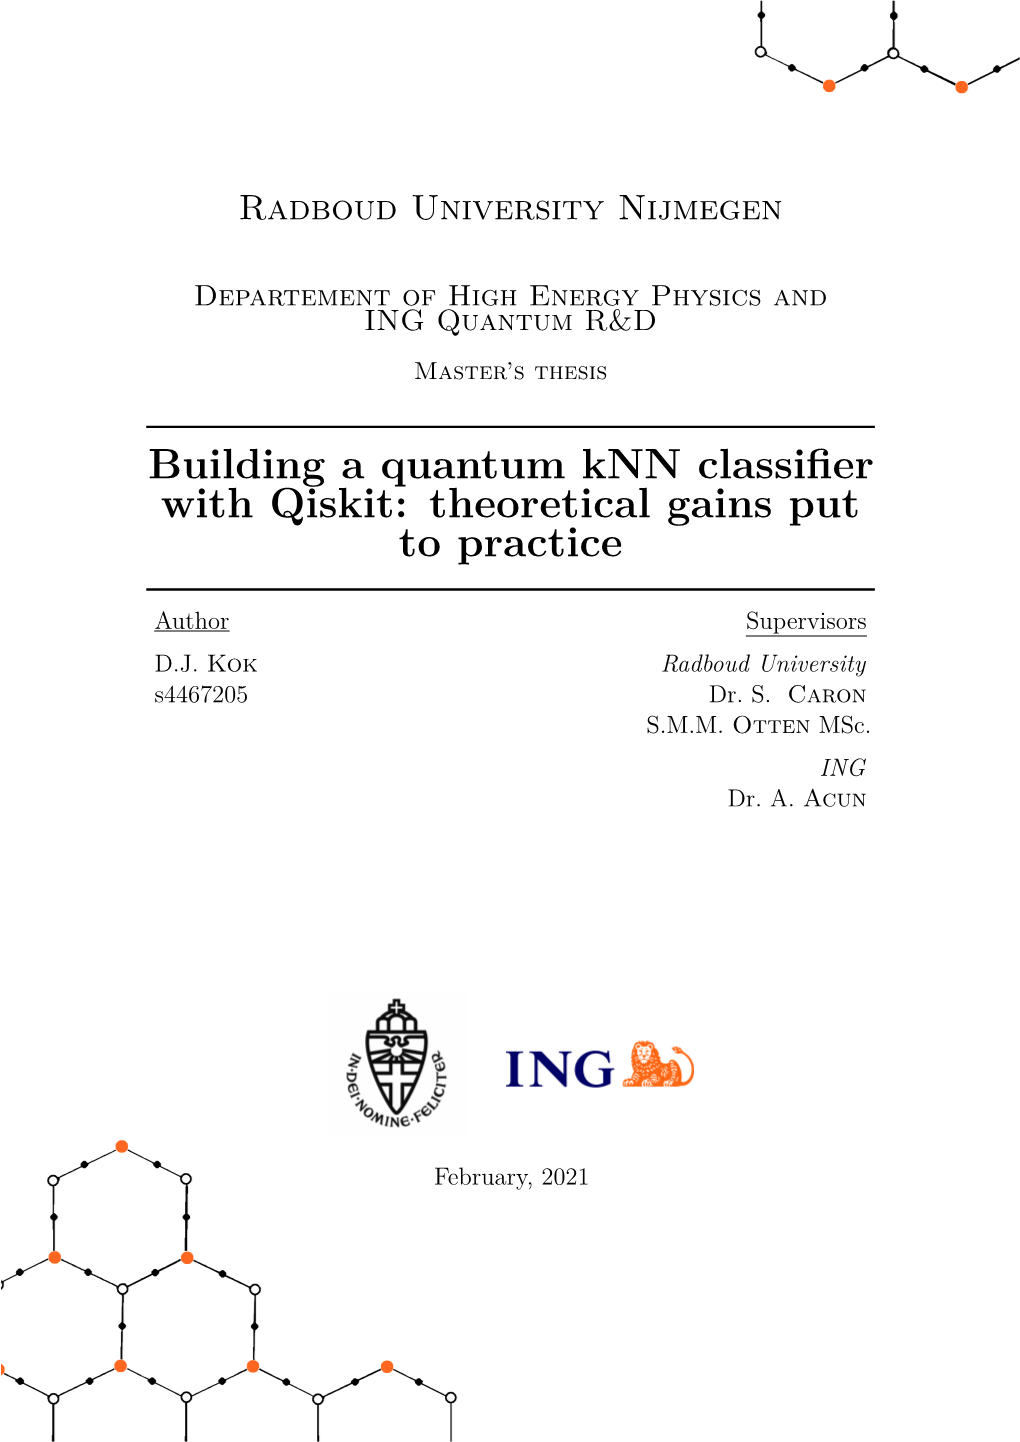 Building a Quantum Knn Classifier with Qiskit: Theoretical Gains Put to Practice